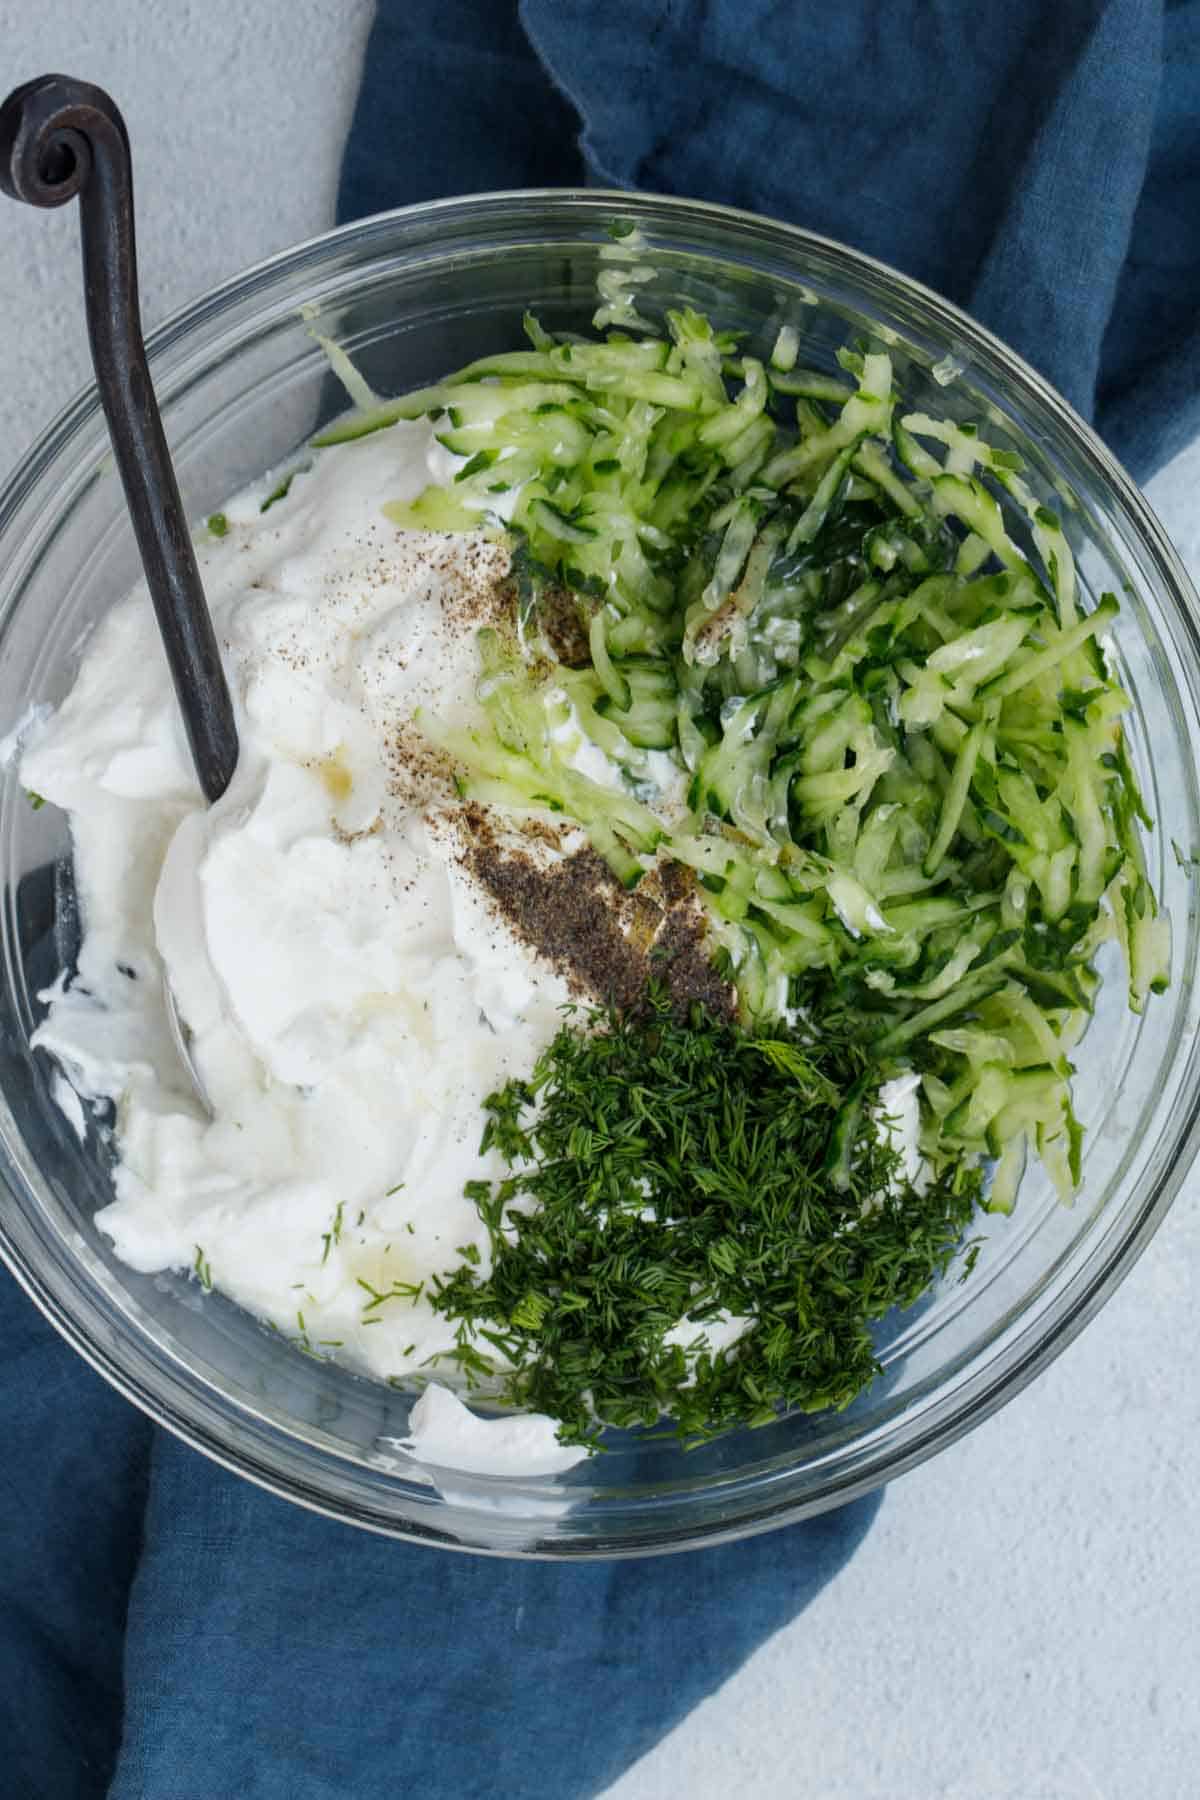 All ingredients for tzatziki sauce in a bowl unmixed.